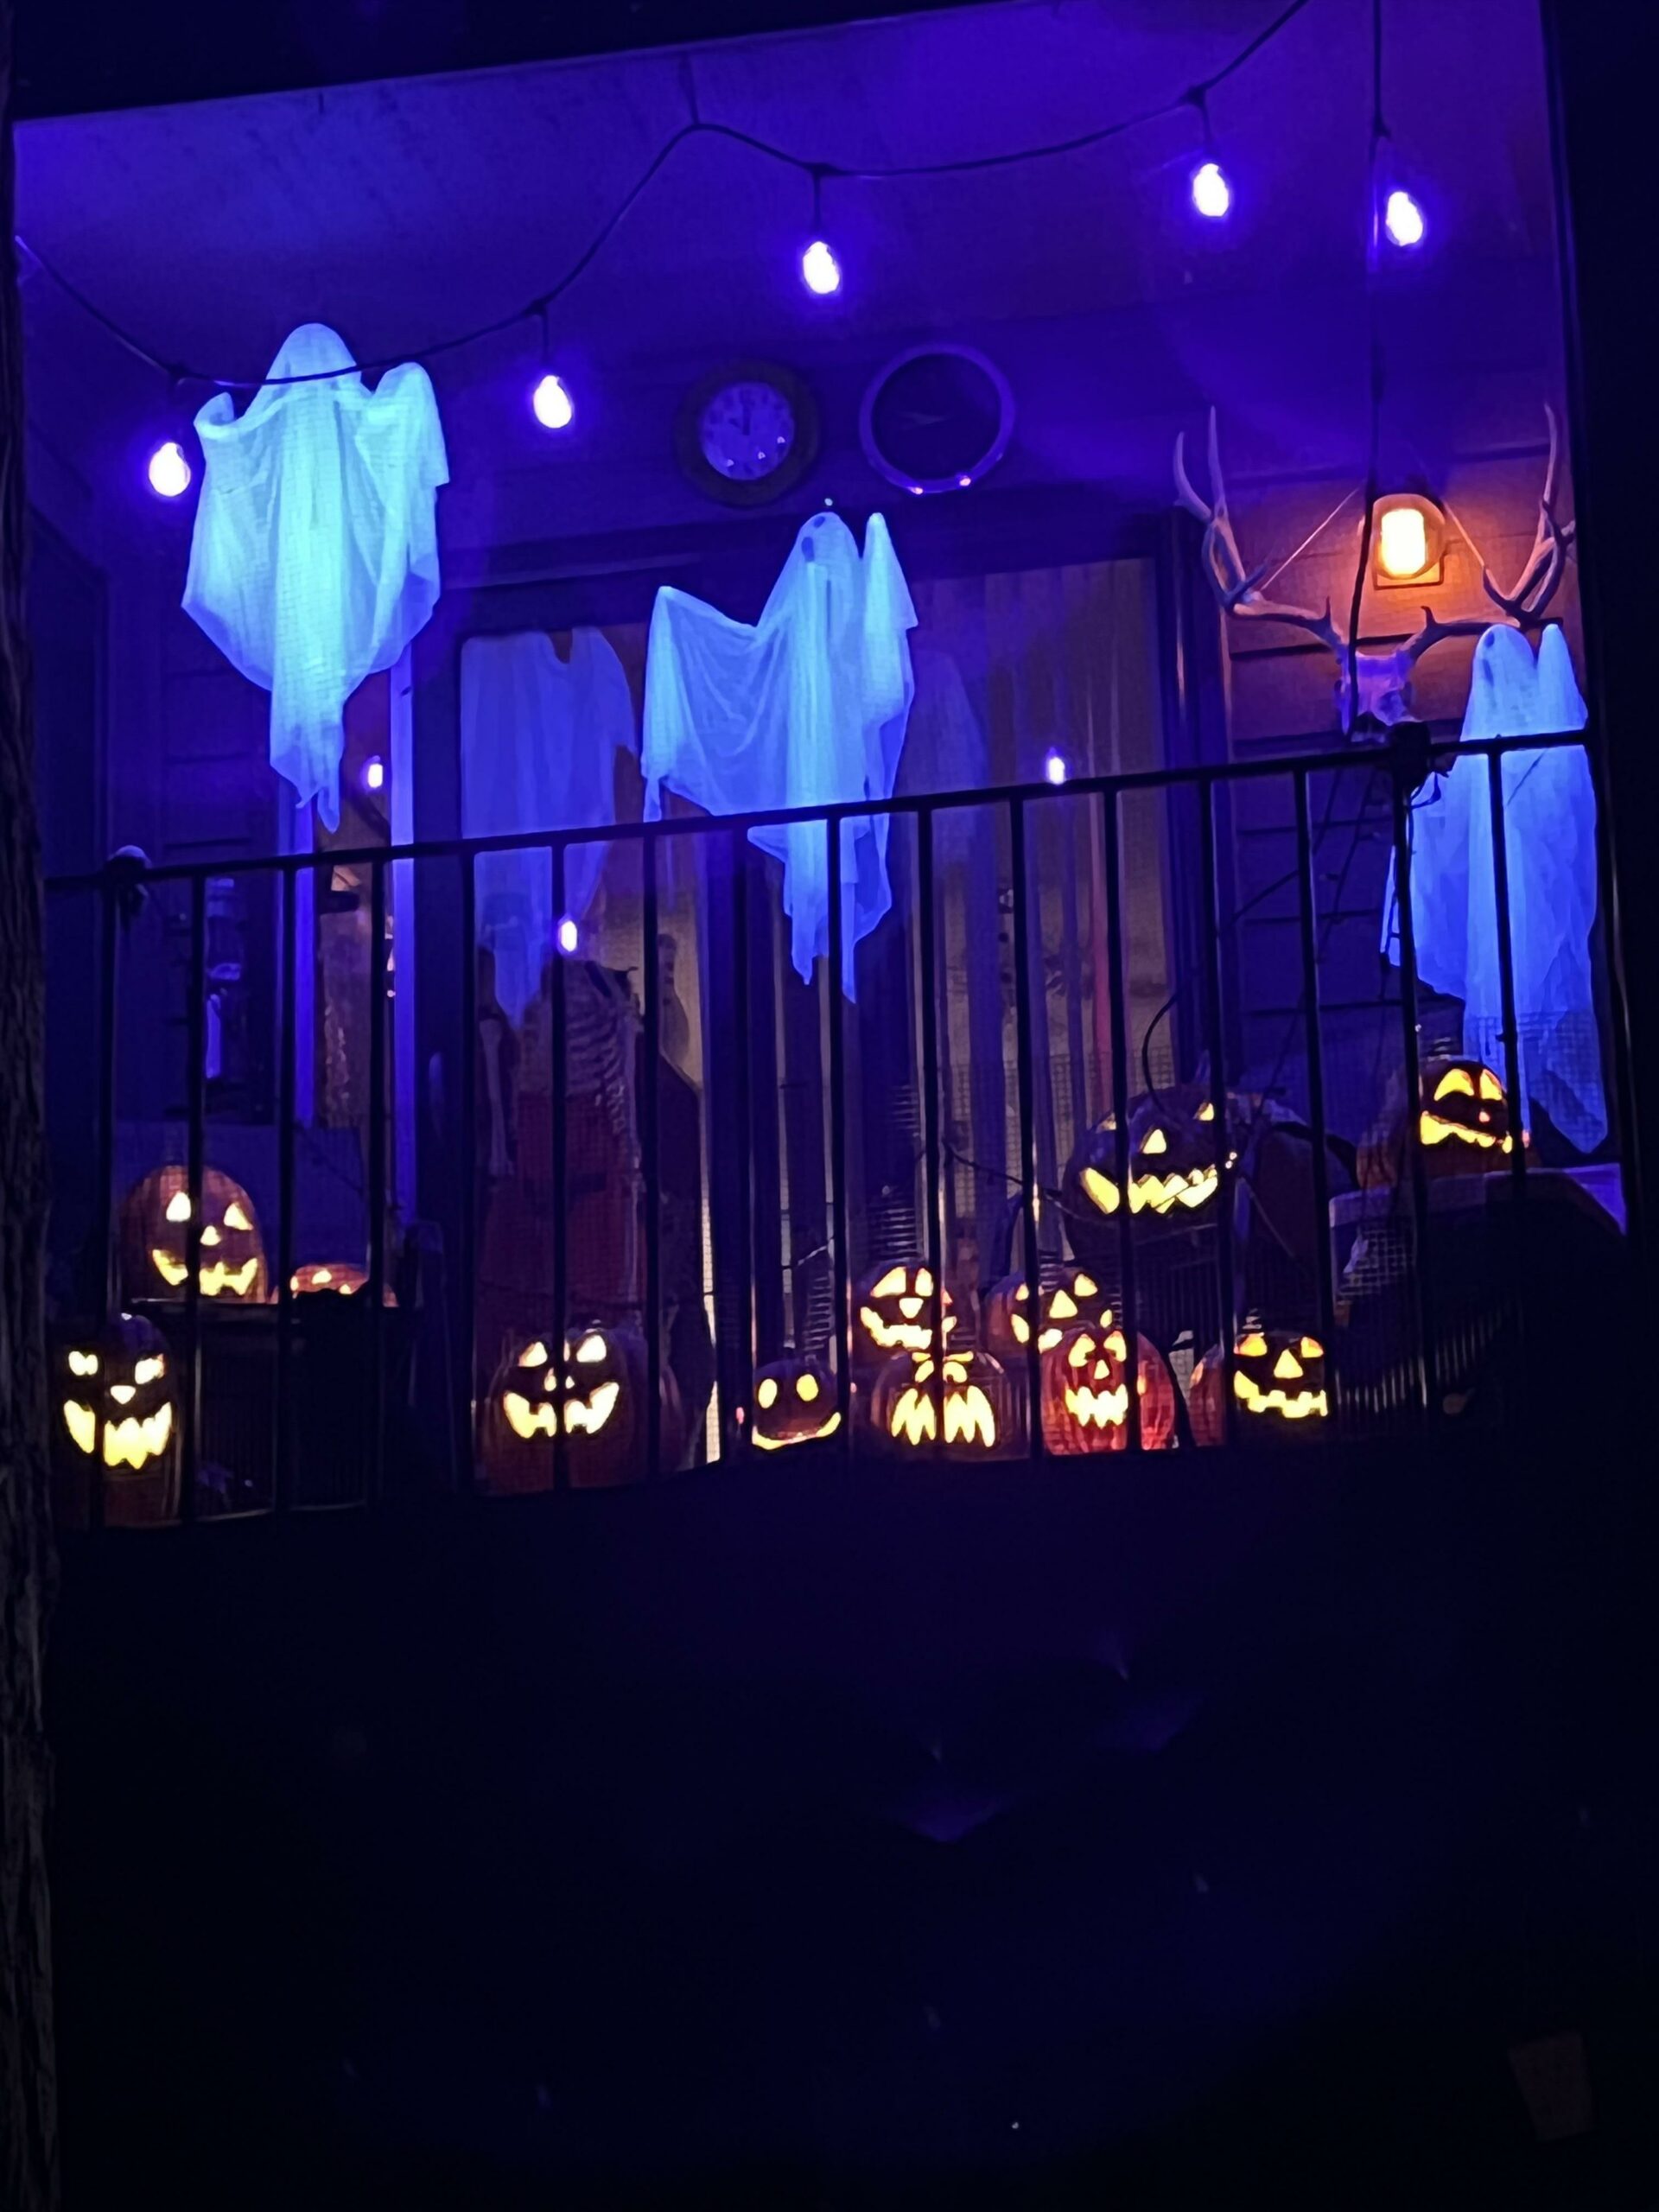 apartment balcony decorated for Halloween with glowing ghosts.